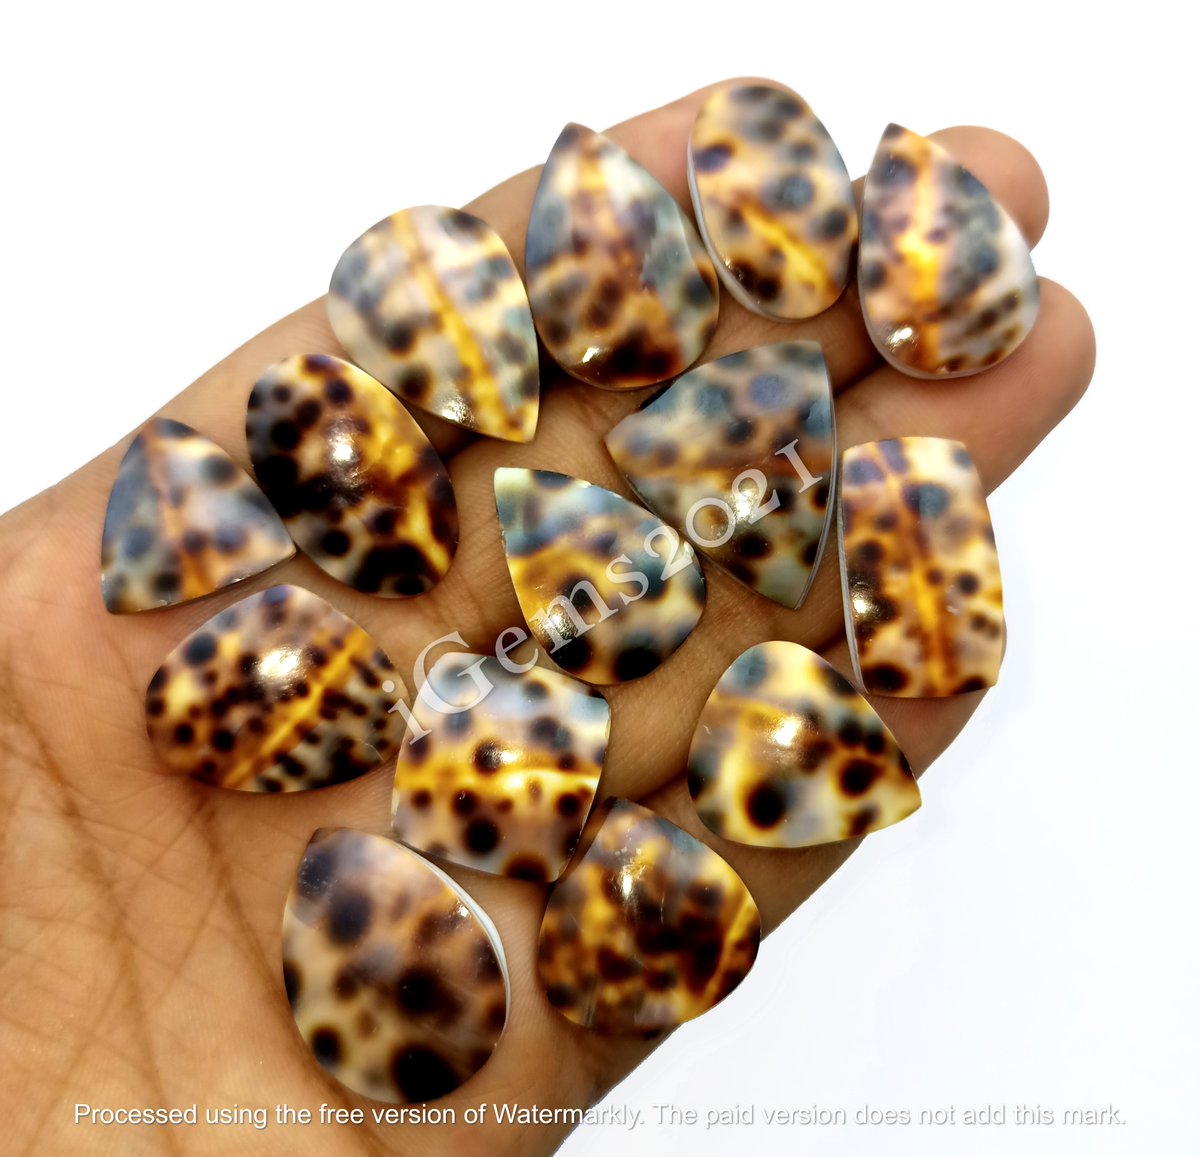 Natural Leopardskin Shell Cabochon lot, gemstone Jewelry

DM For Price
Size 15 to 35mm Approx
Free Drilling Service
Shipping$6 Combine Shipping Available

#leopardskin #leopardskinshell #shell #shelljewelry #shellearrings #leopard #leopardgemstone #leopardcabochon